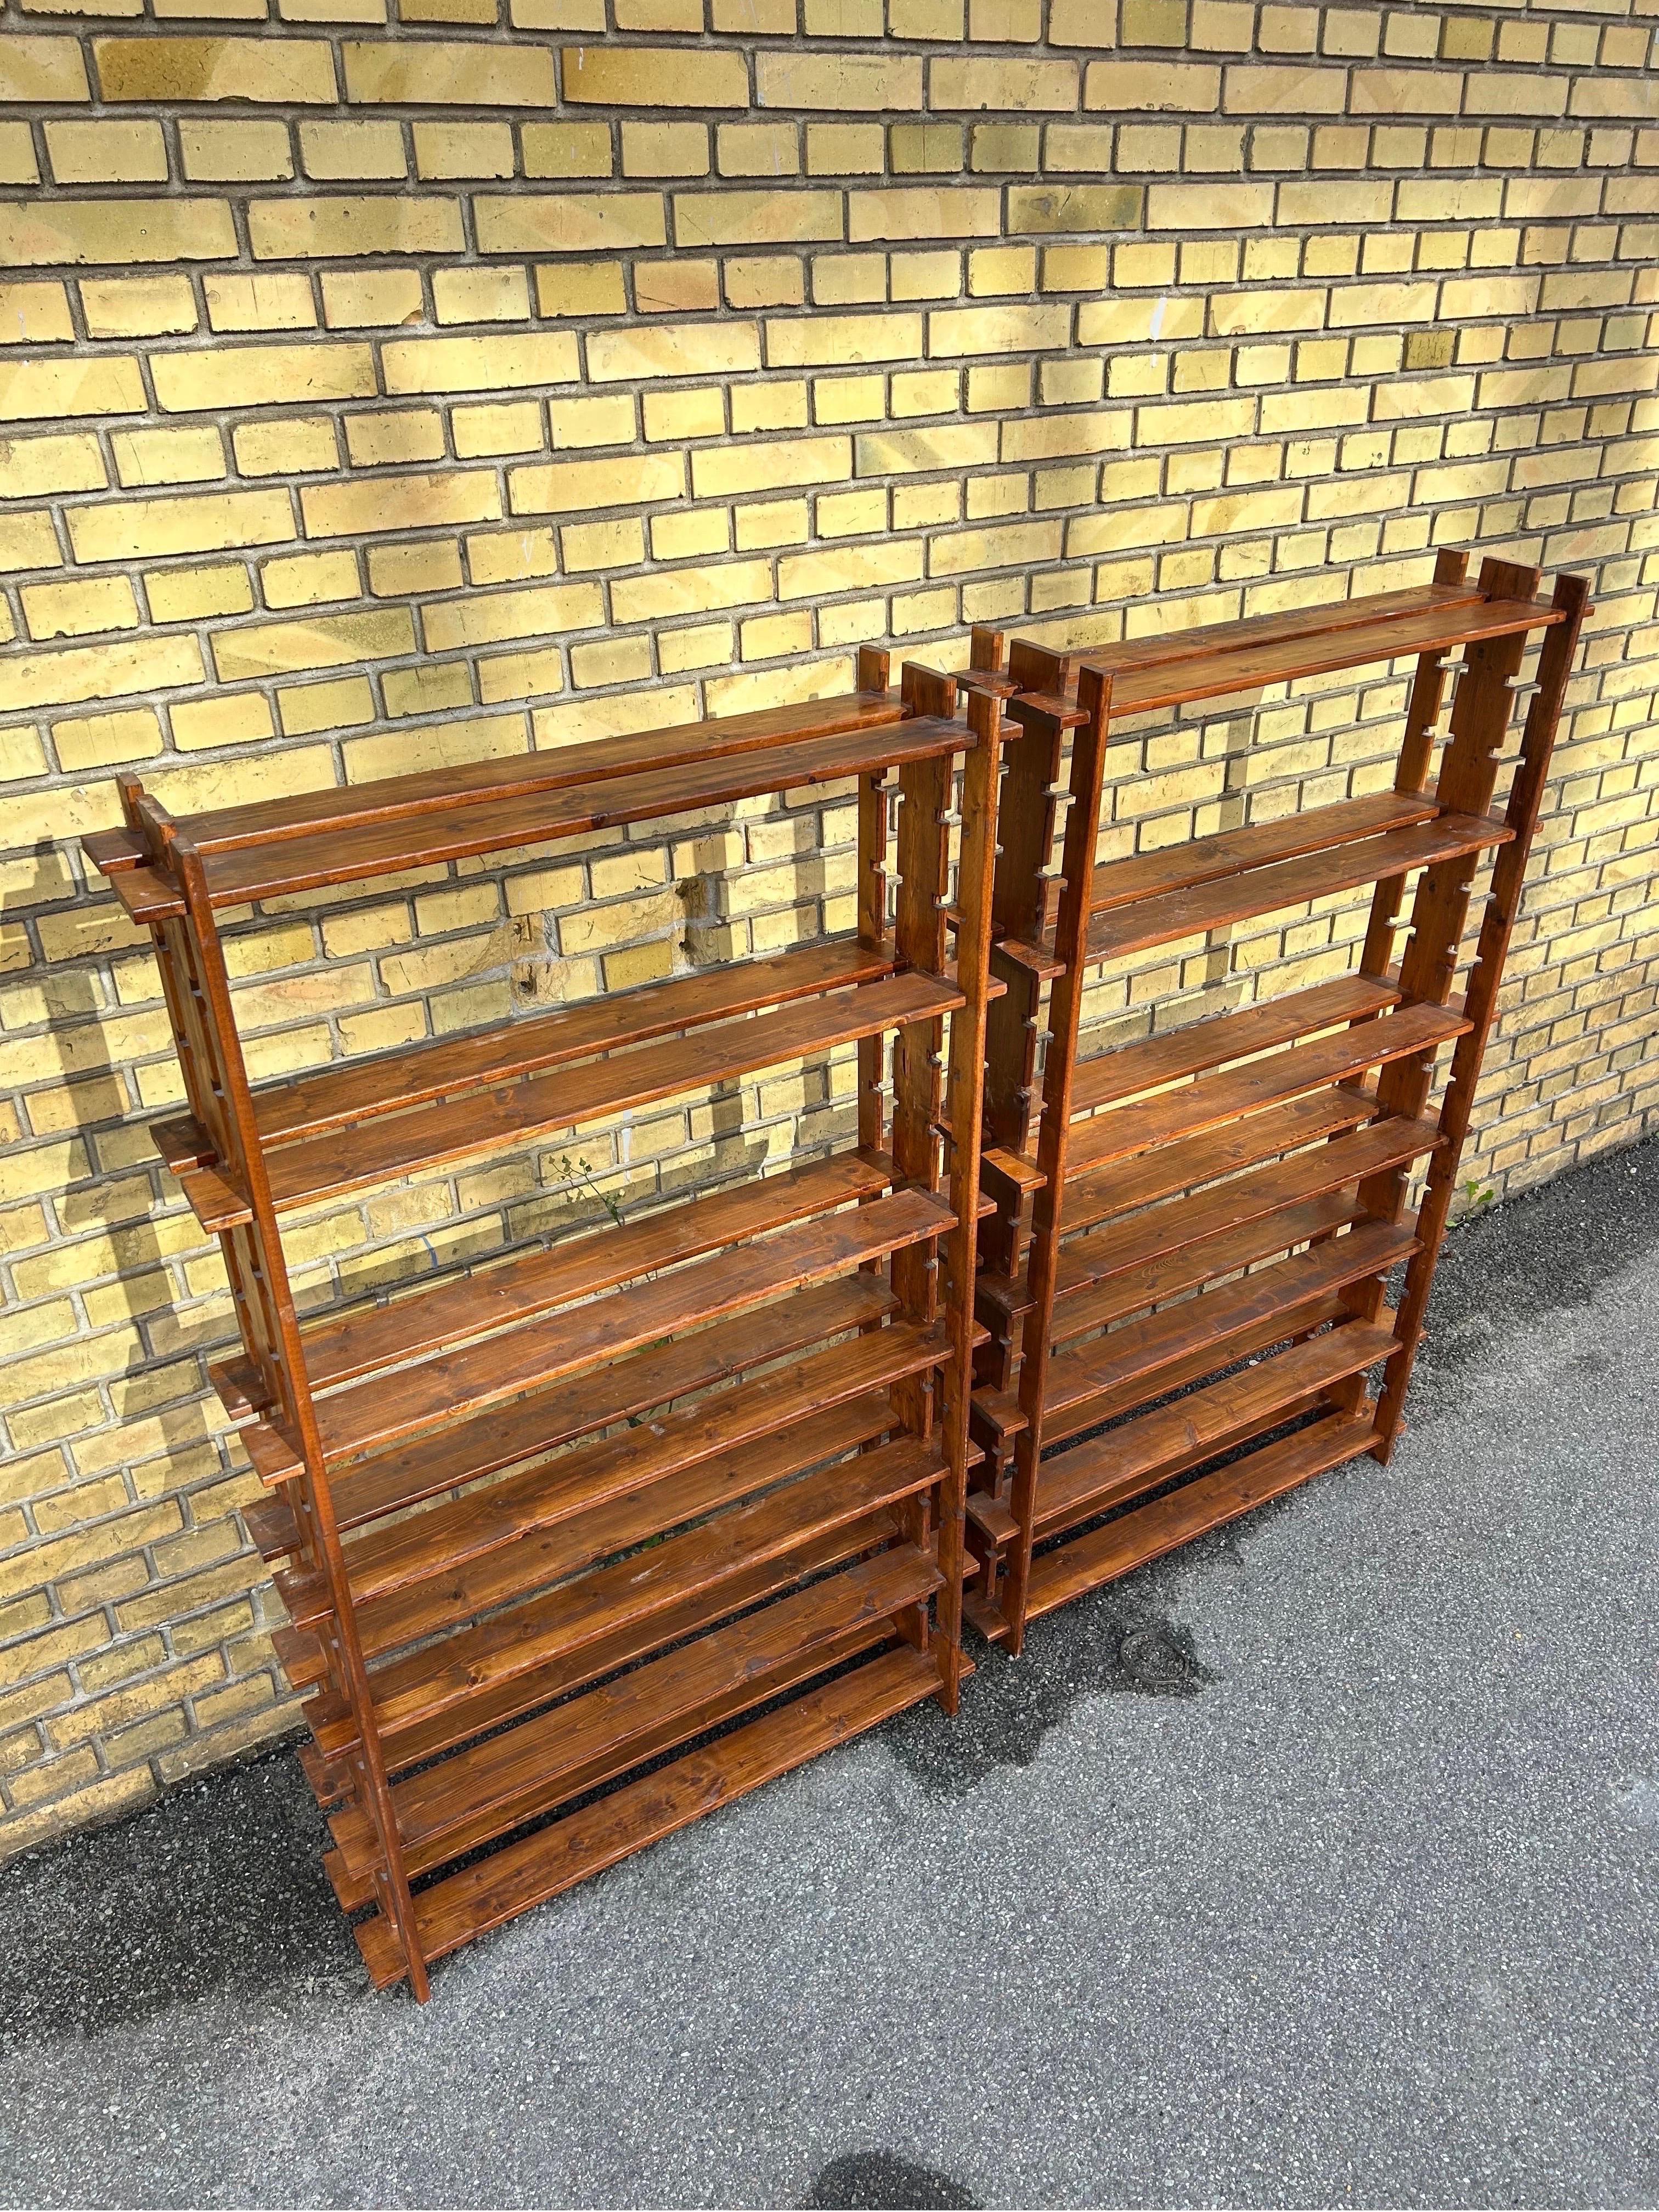 Rare pair of shelves in the style of the French designer Maison Regain, the shelves are made in France in the 1960’s in solid dark stained wood by a talented craftsman with a great eye for detail.

The shelves are in good patinaed condition with a